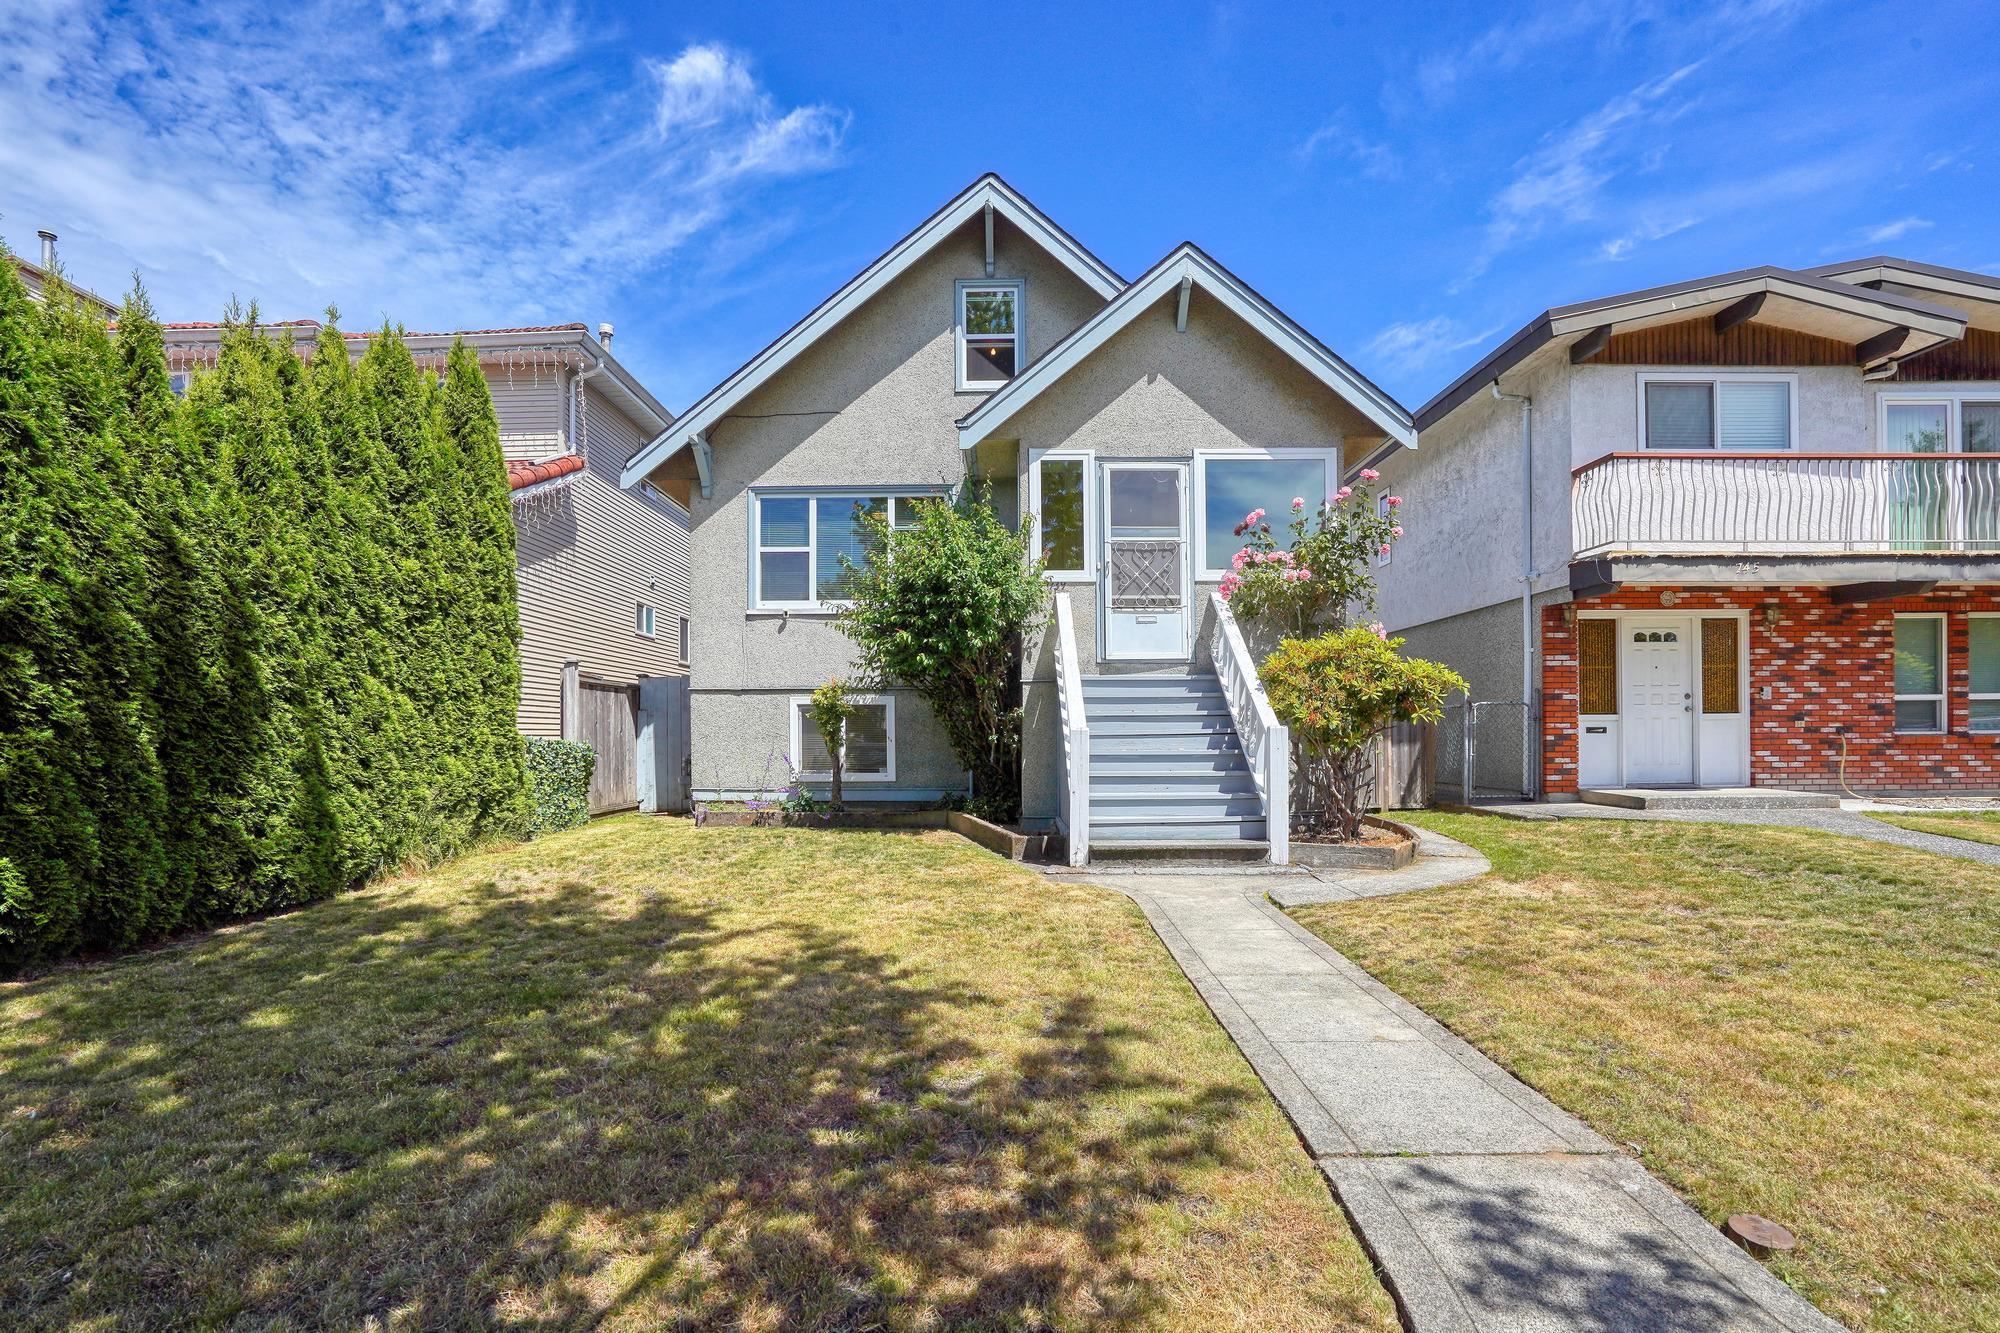 I have sold a property at 739 50TH AVE E in Vancouver
